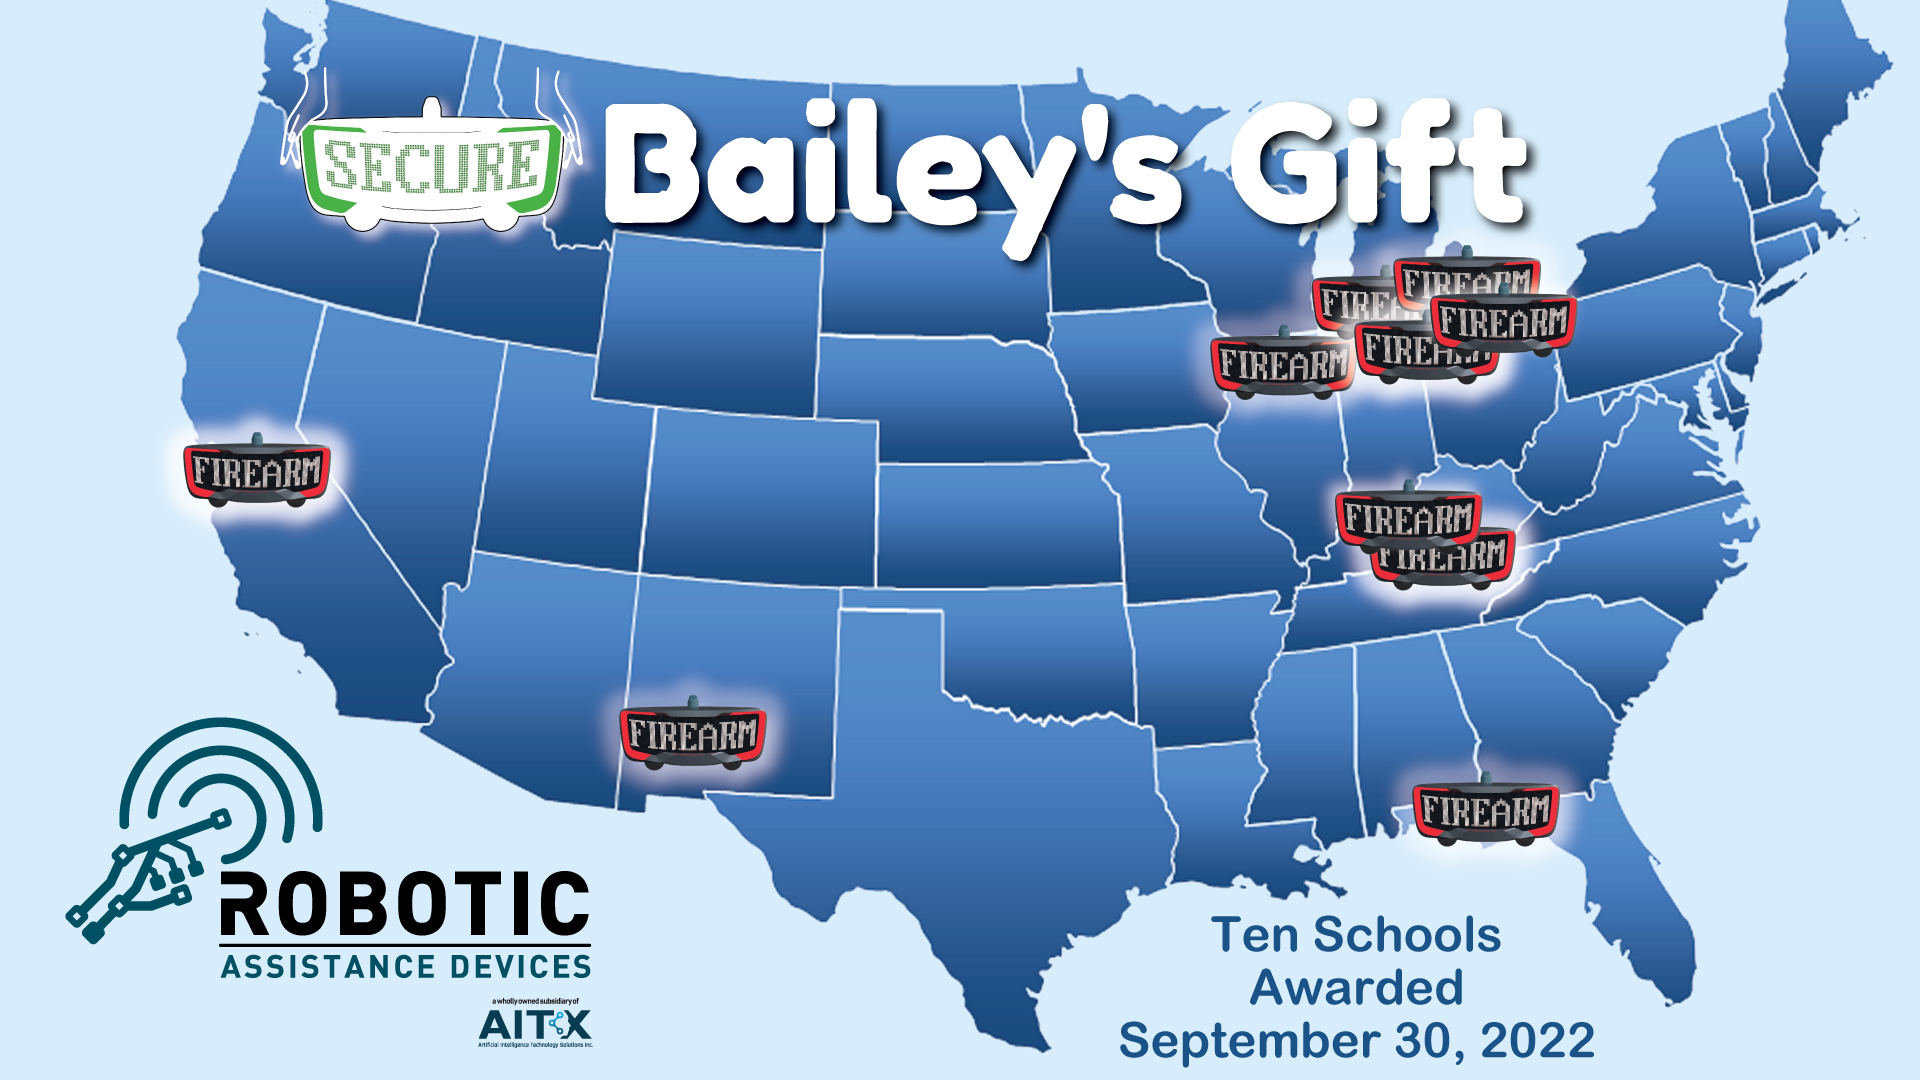 Map of the United States showing the locations of the 10 schools that have been selected as recipients of RAD’s Bailey’s Gift ROSA with Firearm Detection systems.